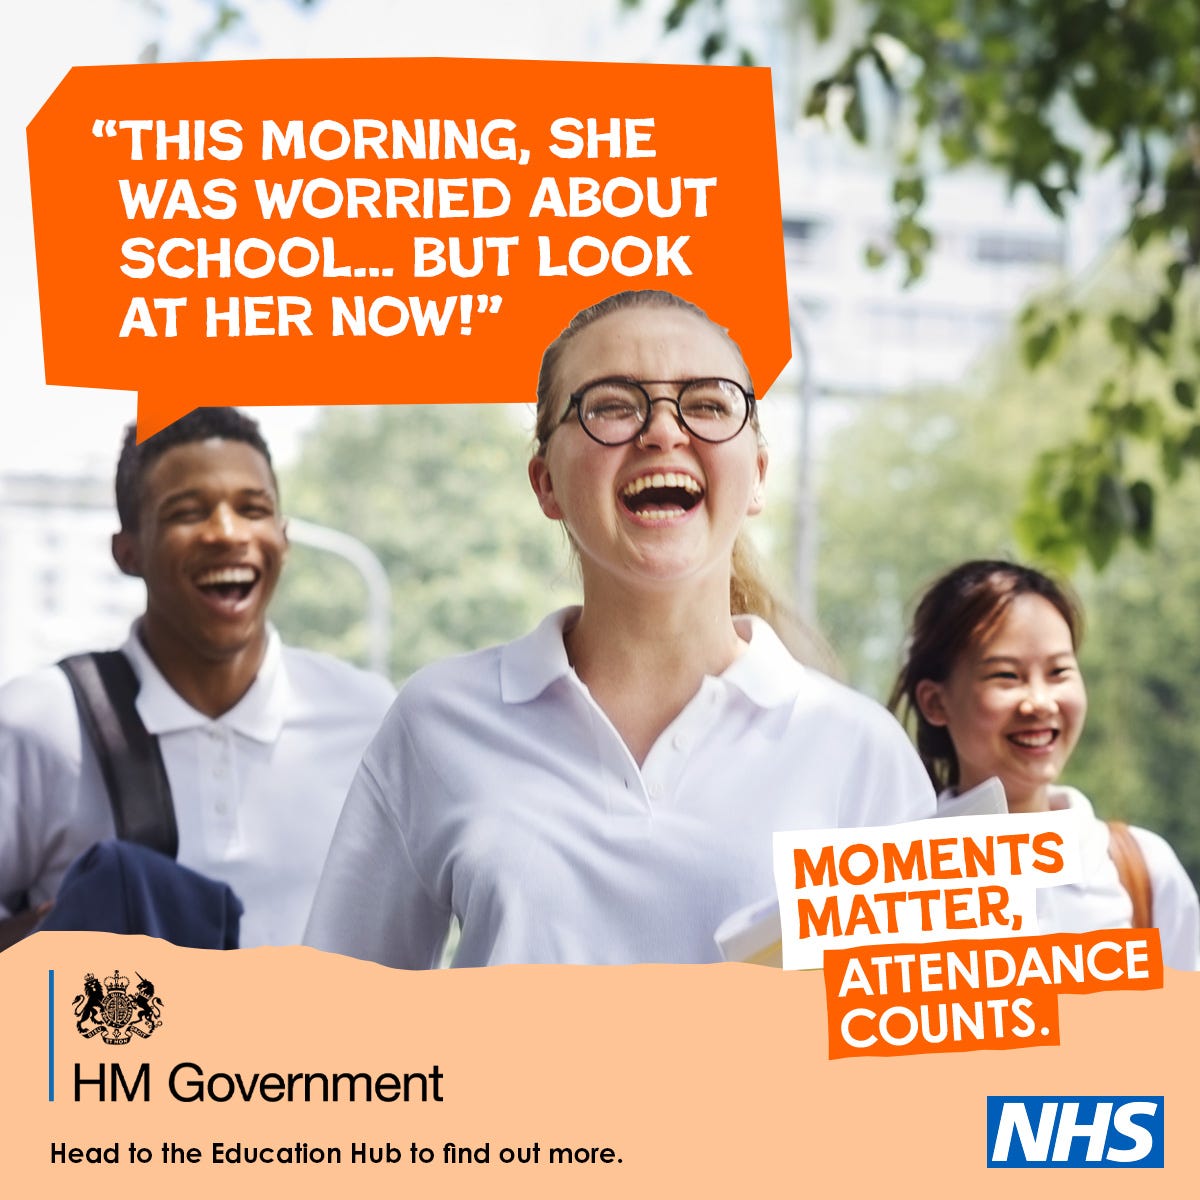 Poster by HM Government and the NHS with the tagline "Moments Matter, Attendance Counts" campaign. Three pupils are walking outside, smiling. In an orange text bubble with white text reads "This morning, she was worried about school... but look at her now!"